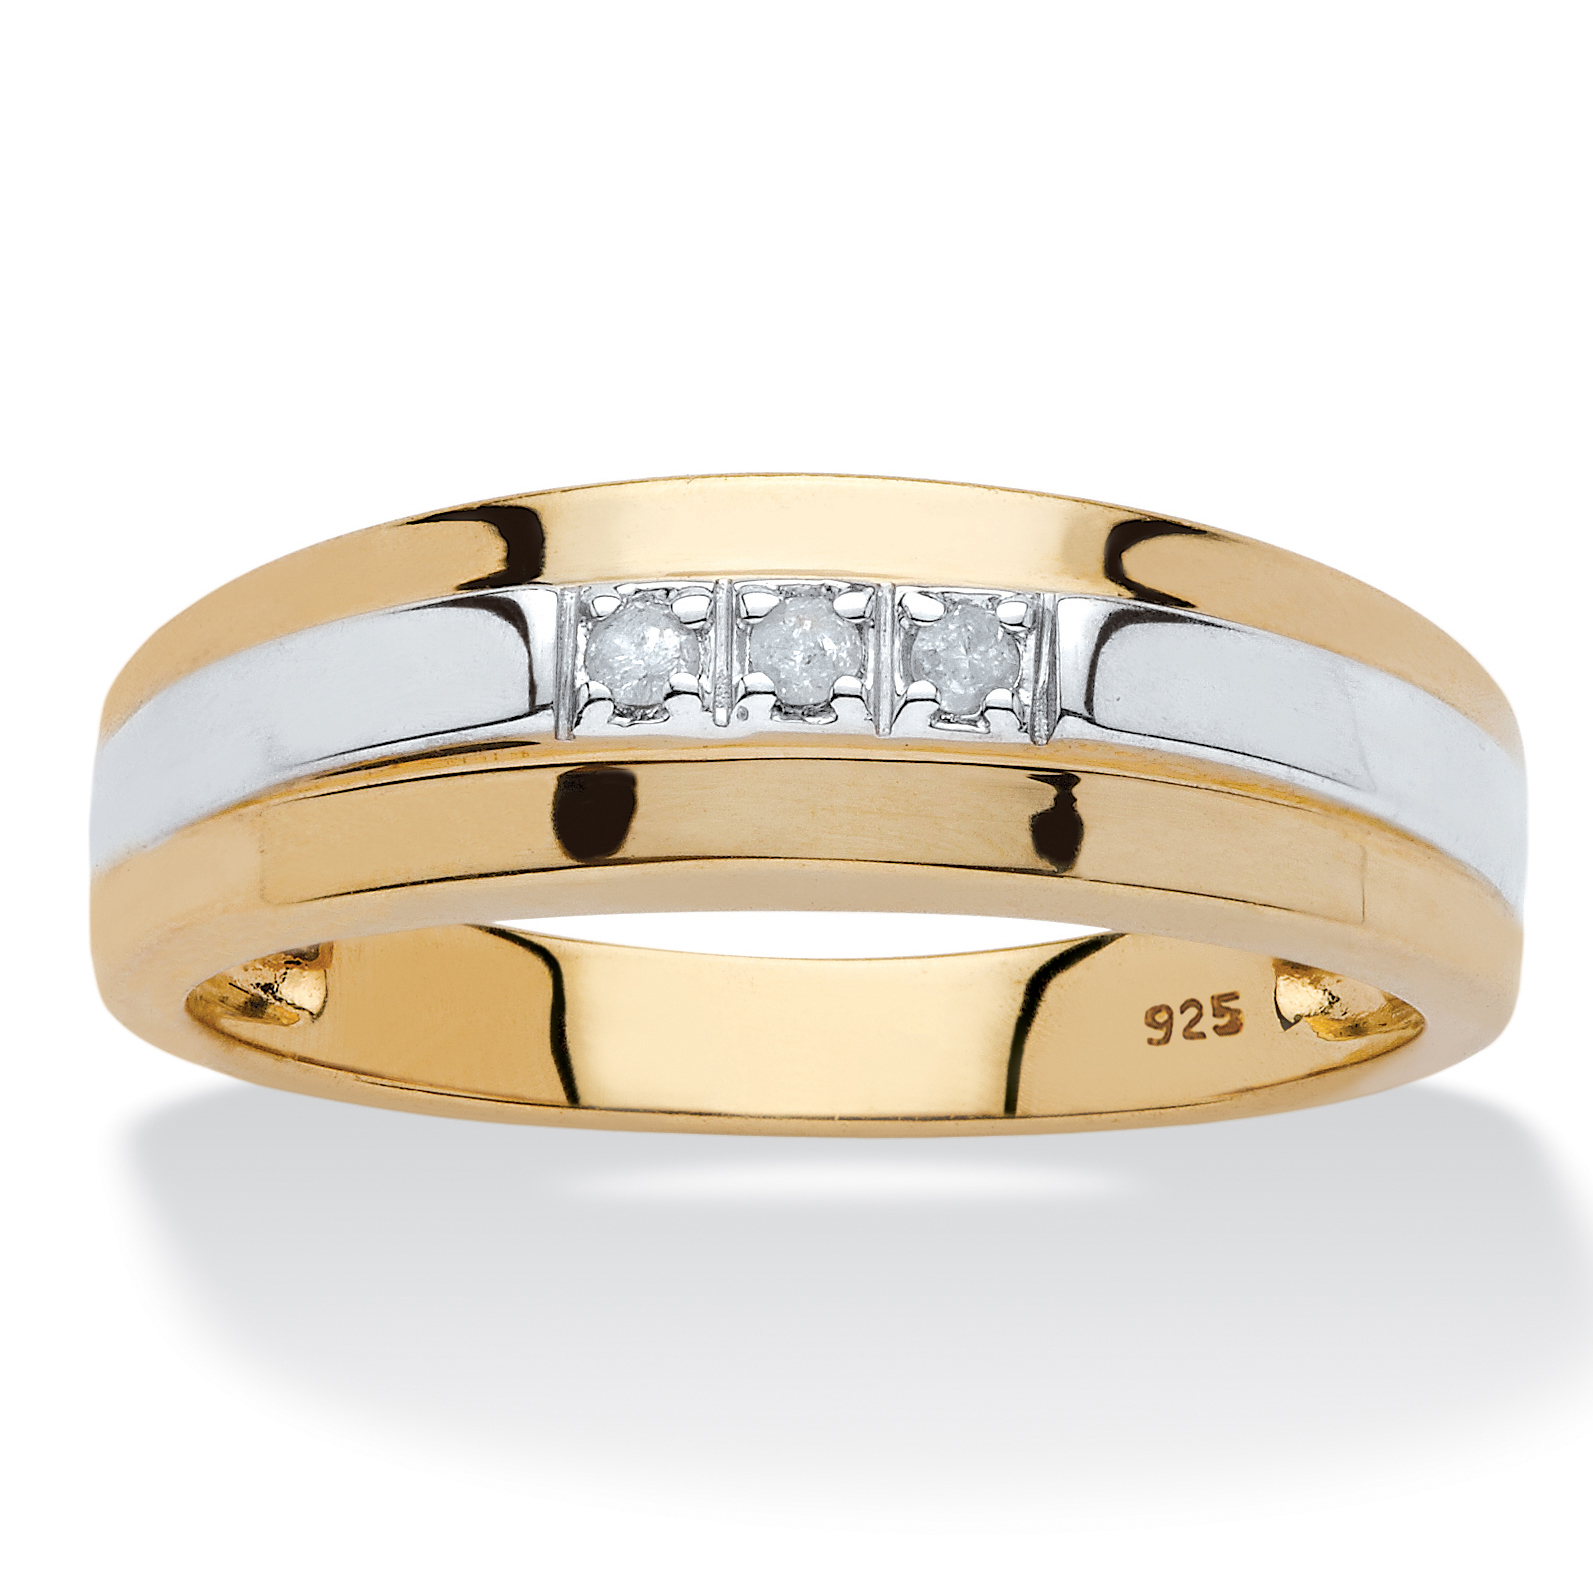 PalmBeach Jewelry Men's Diamond Accent Two-Tone Band in 18k Yellow Gold-plated Sterling Silver